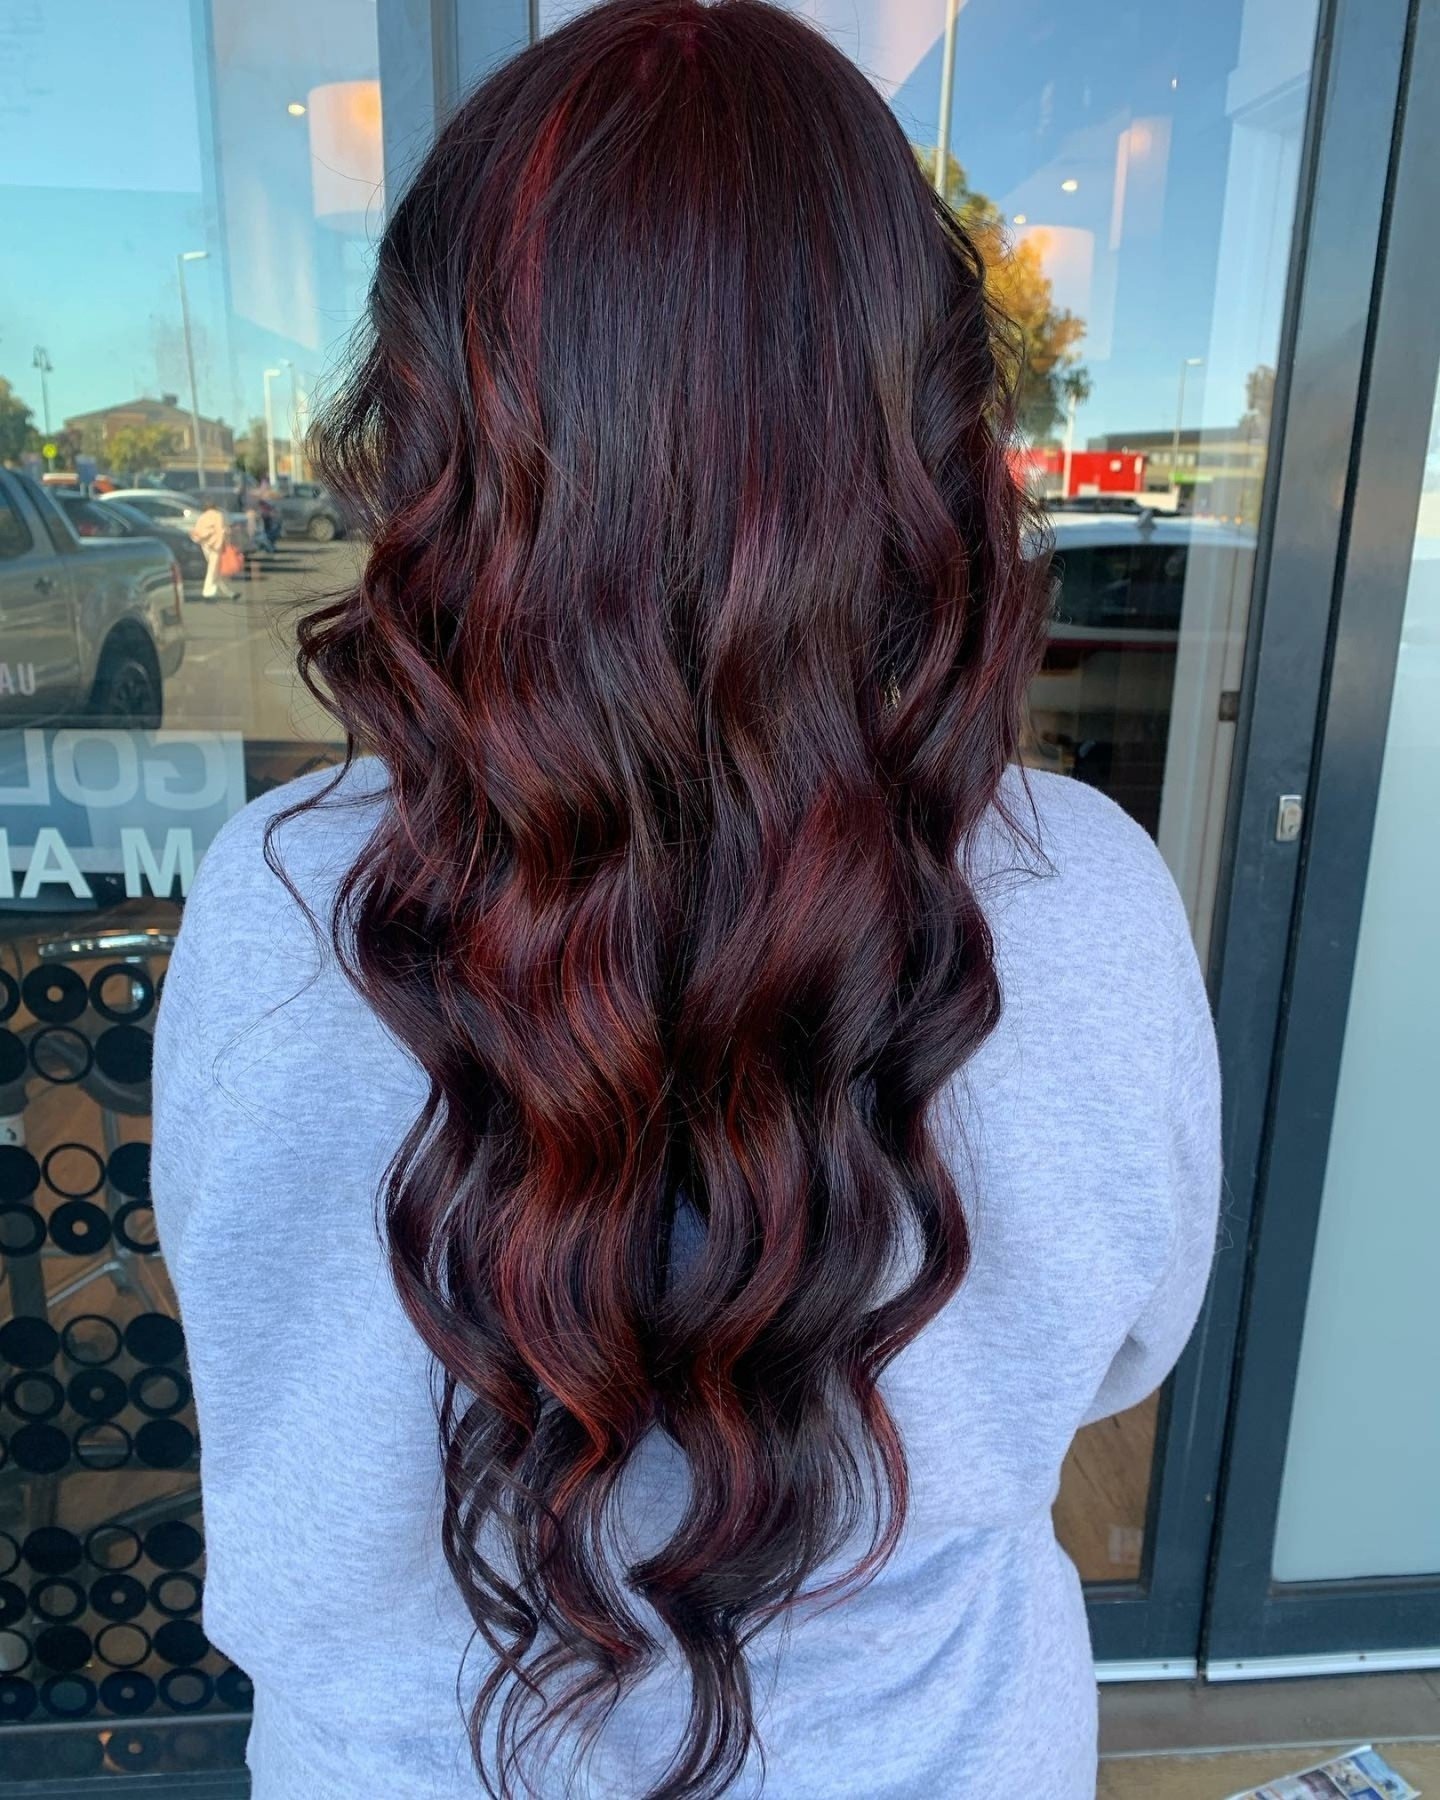 We are loving this subtle, glossy red tone. Colour doesn't have to be loud. If you're thinking of a change we can help you find the perfect shade. ❣️